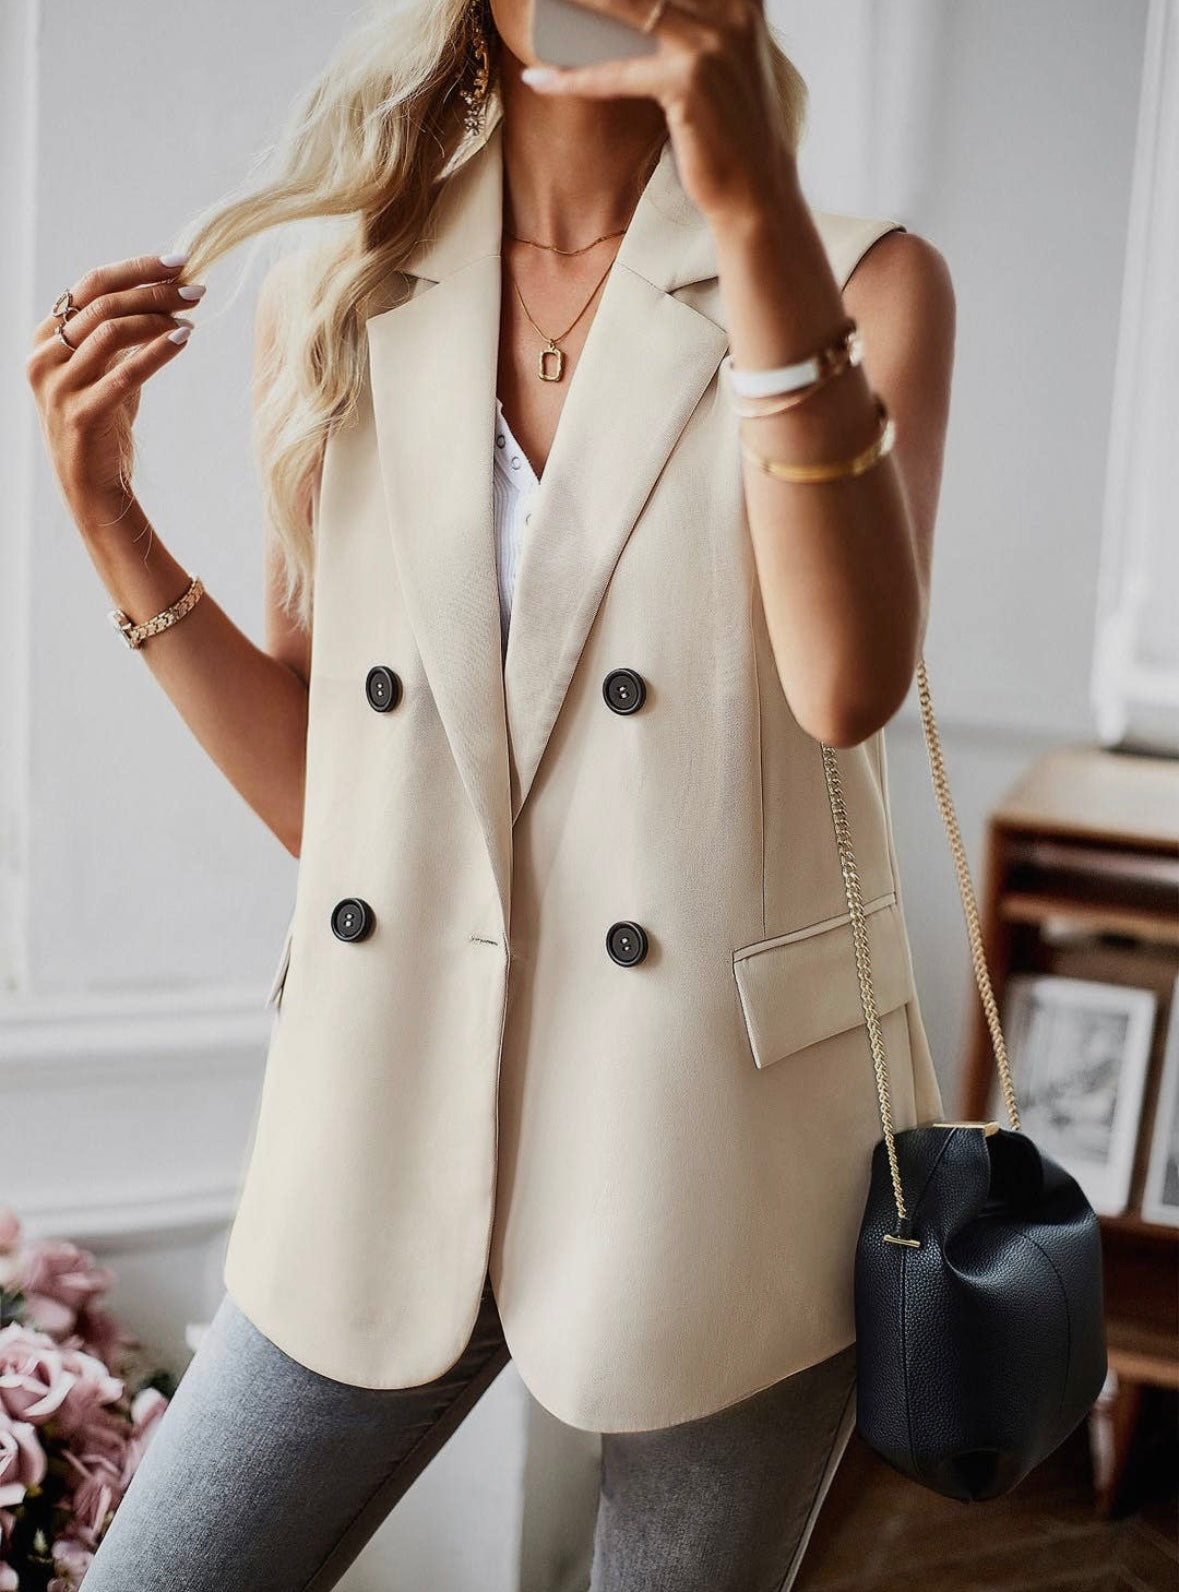 Double breasted blazer vest